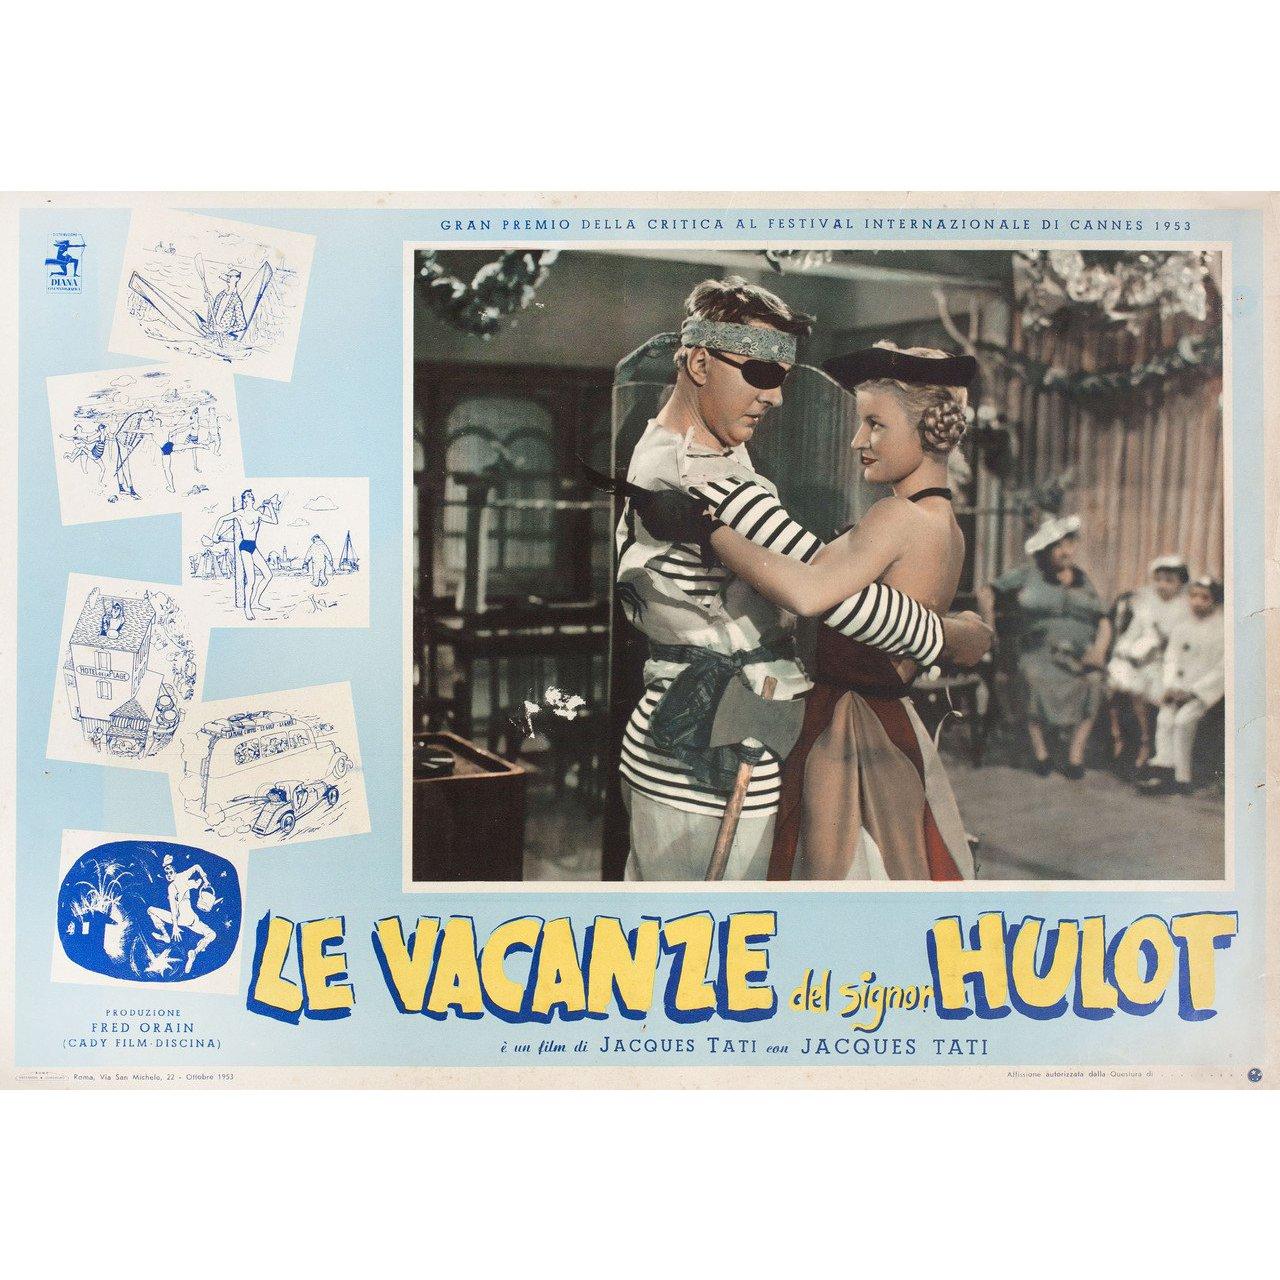 Original 1958 Italian fotobusta poster for the 1953 film Mr. Hulot's Holiday (Les Vacances de Monsieur Hulot) directed by Jacques Tati with Jacques Tati / Louis Perrault / Andre Dubois / Lucien Fregis. Very good-fine condition, folded. Many original